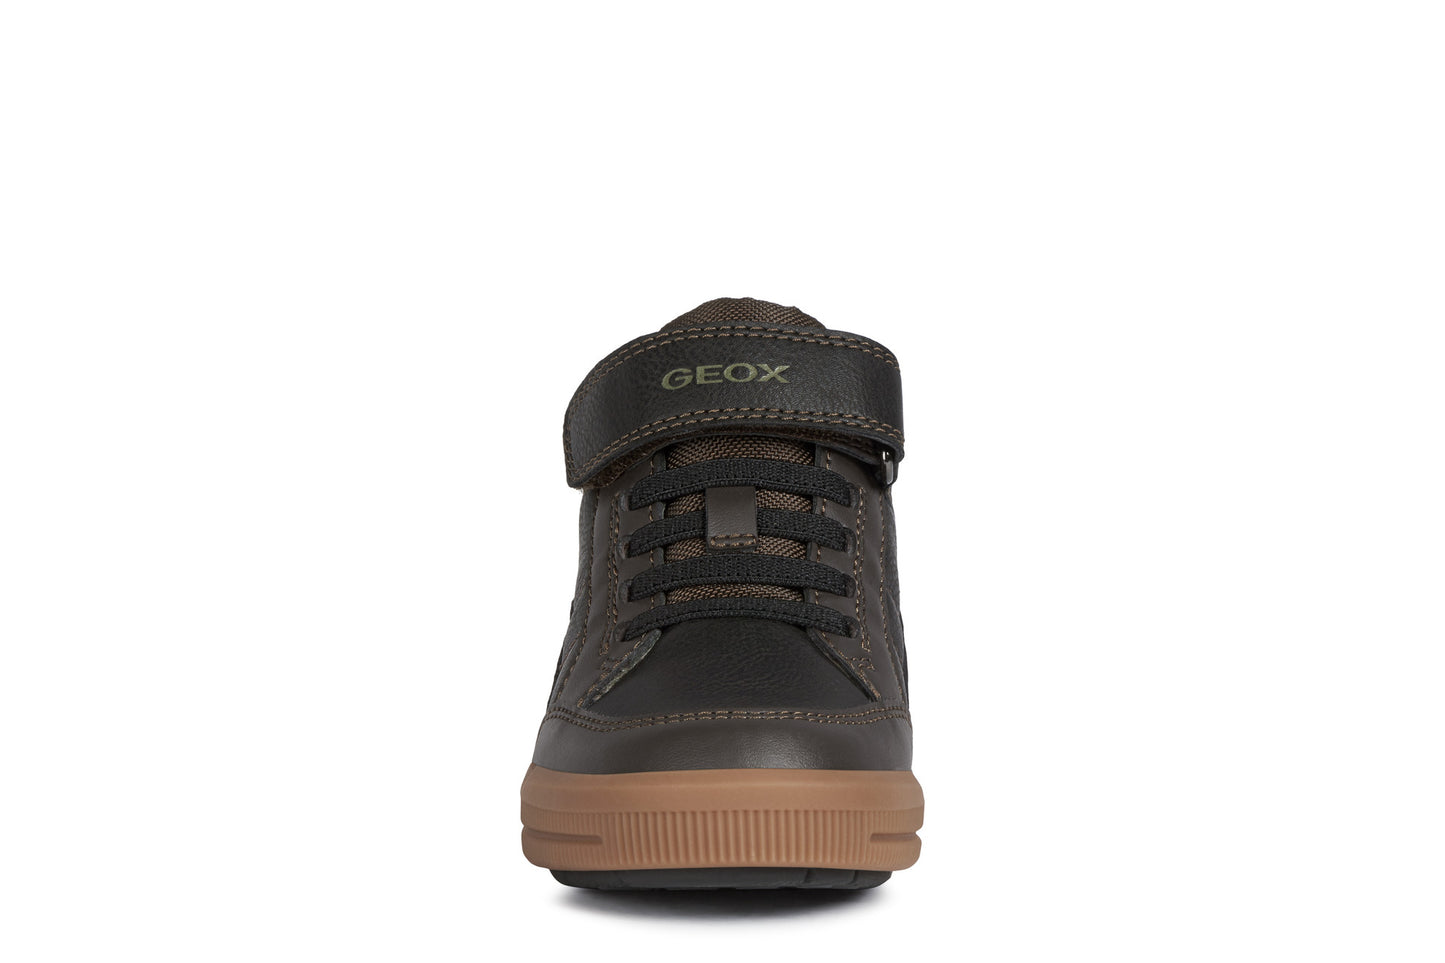 Arzach High-Top Leather Sneaker in Brown/Navy